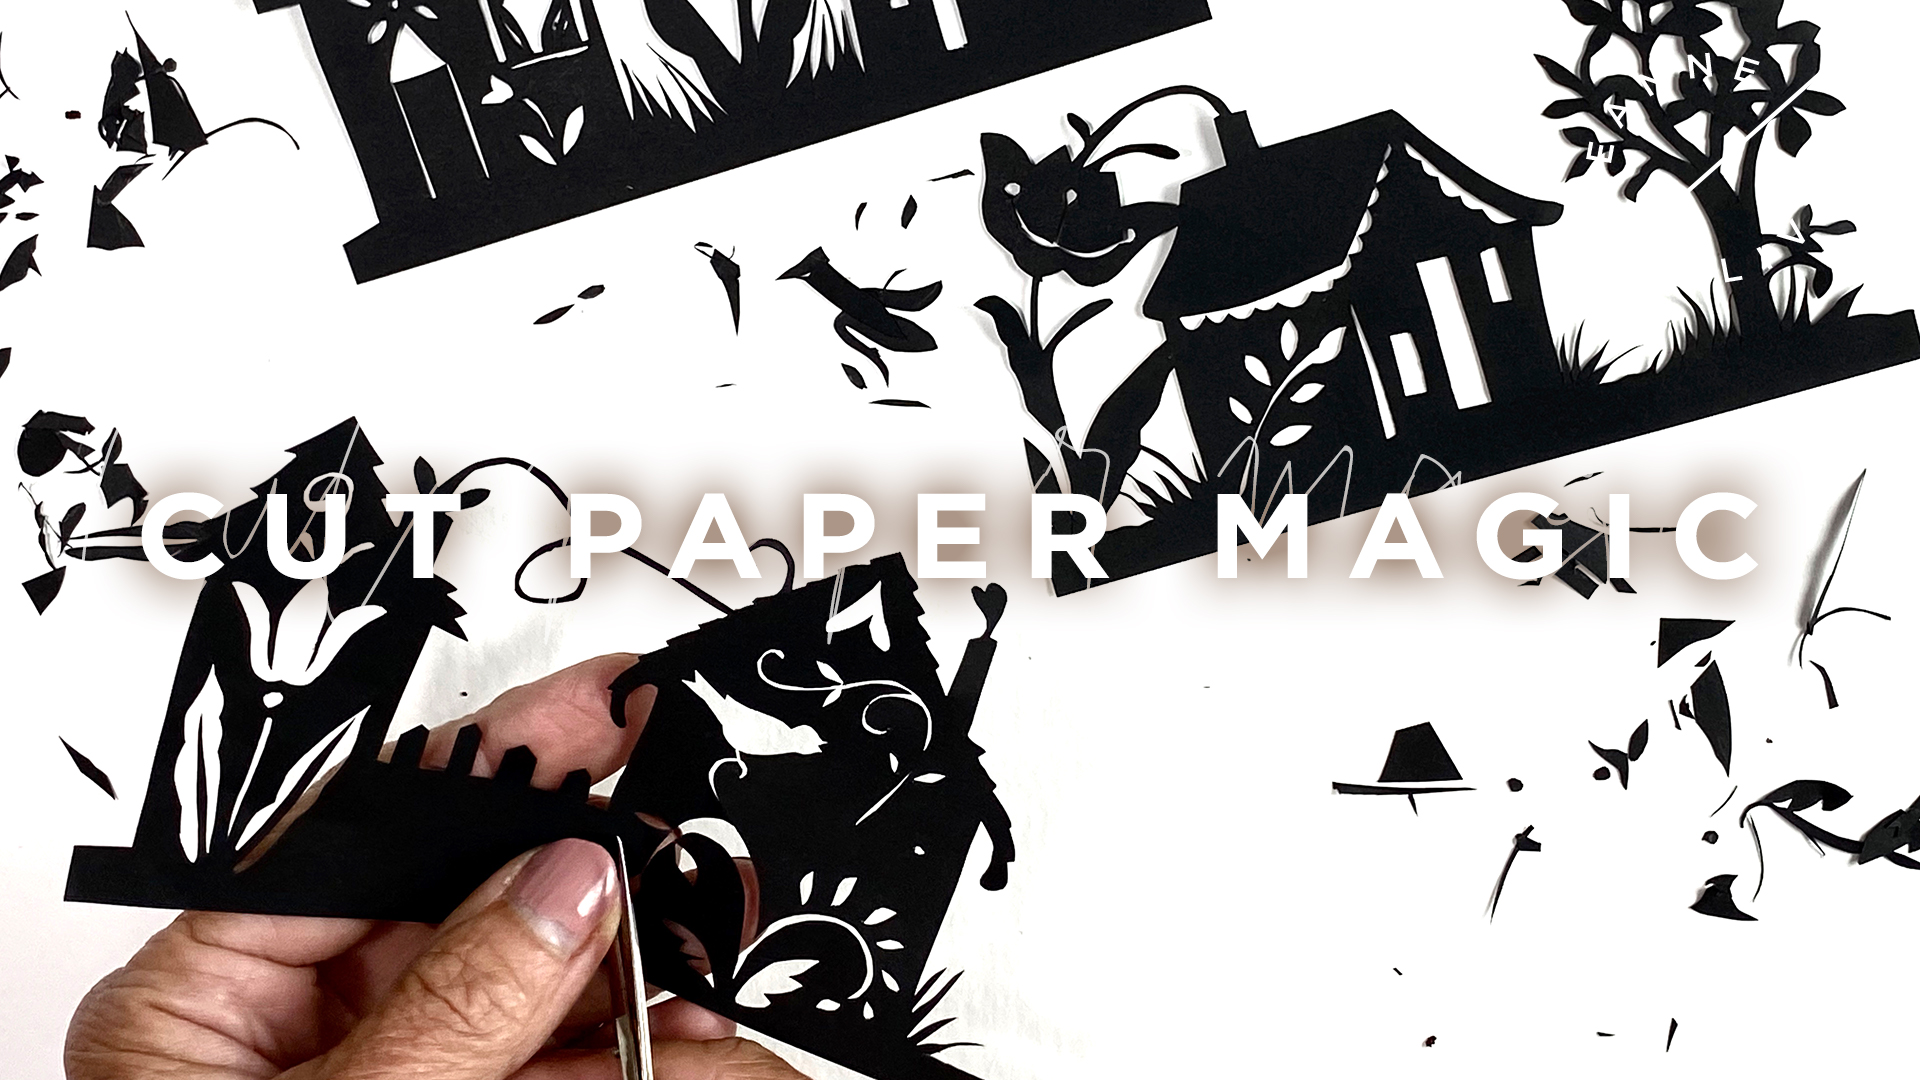 Instant Access Tomorrow! | Cut Paper Magic with Sharyn Sowell